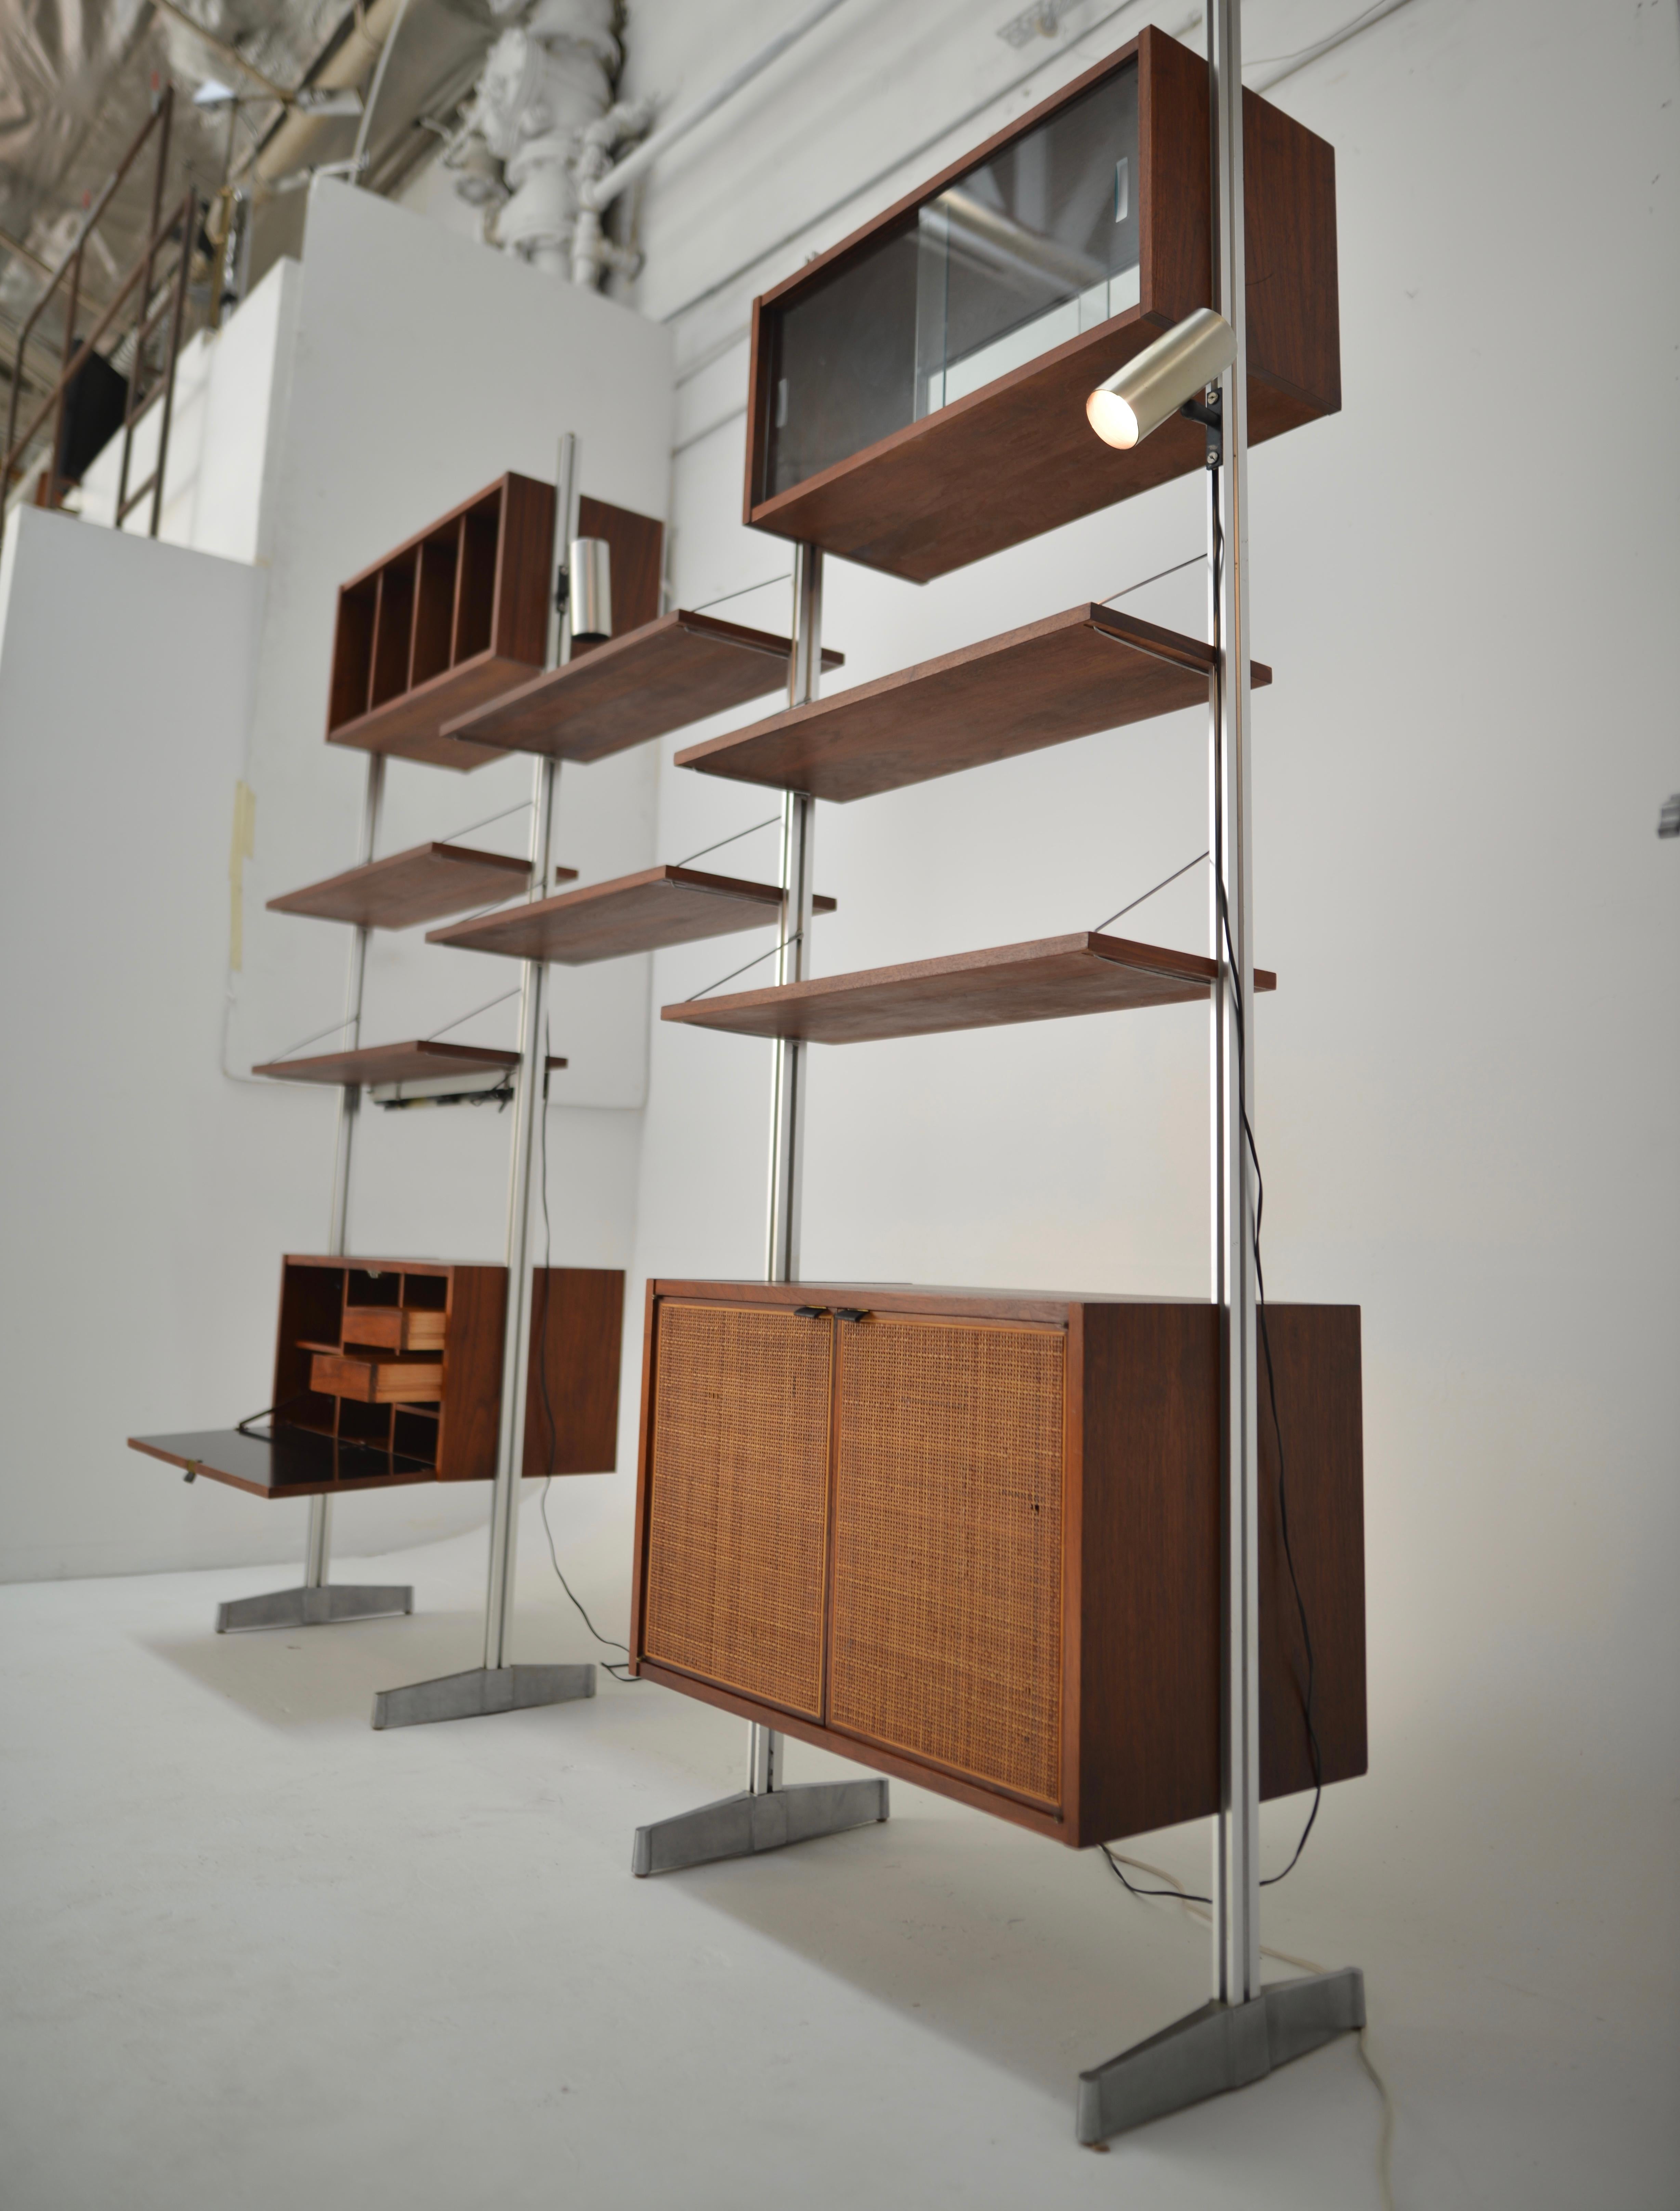 This is a stunning modern wall unit by Founders, a Division of Knoll International, by Milo Baughman.
Aluminium supports with walnut shelves, cabinets and drawers, with adjustable lights.